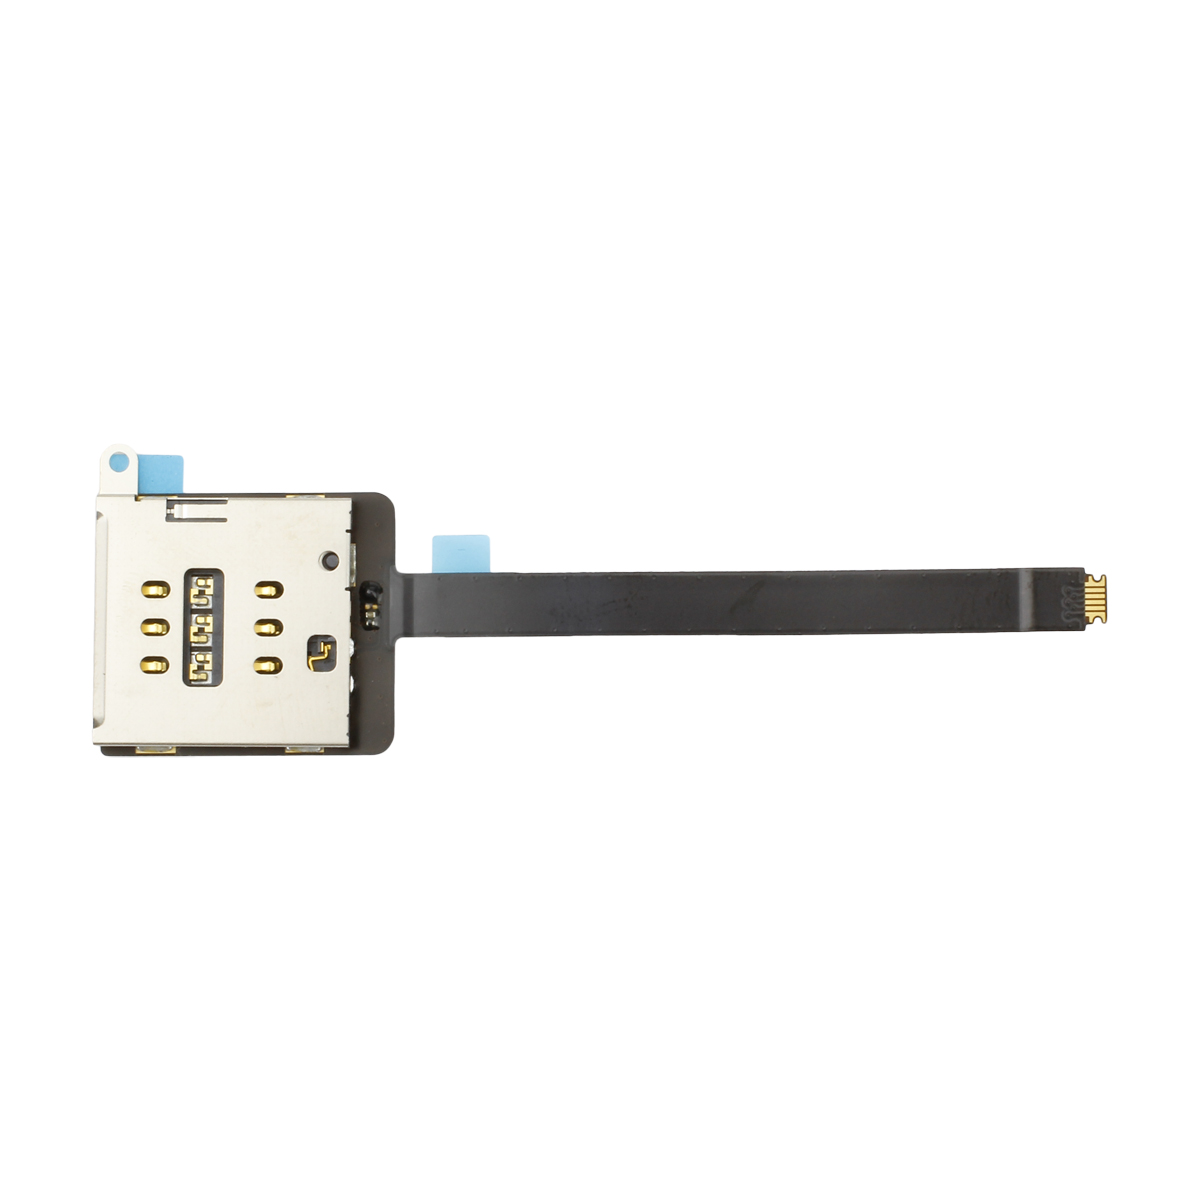 SIM Reader Module compatible with iPad Air 10.5" 2019 (Cellular)